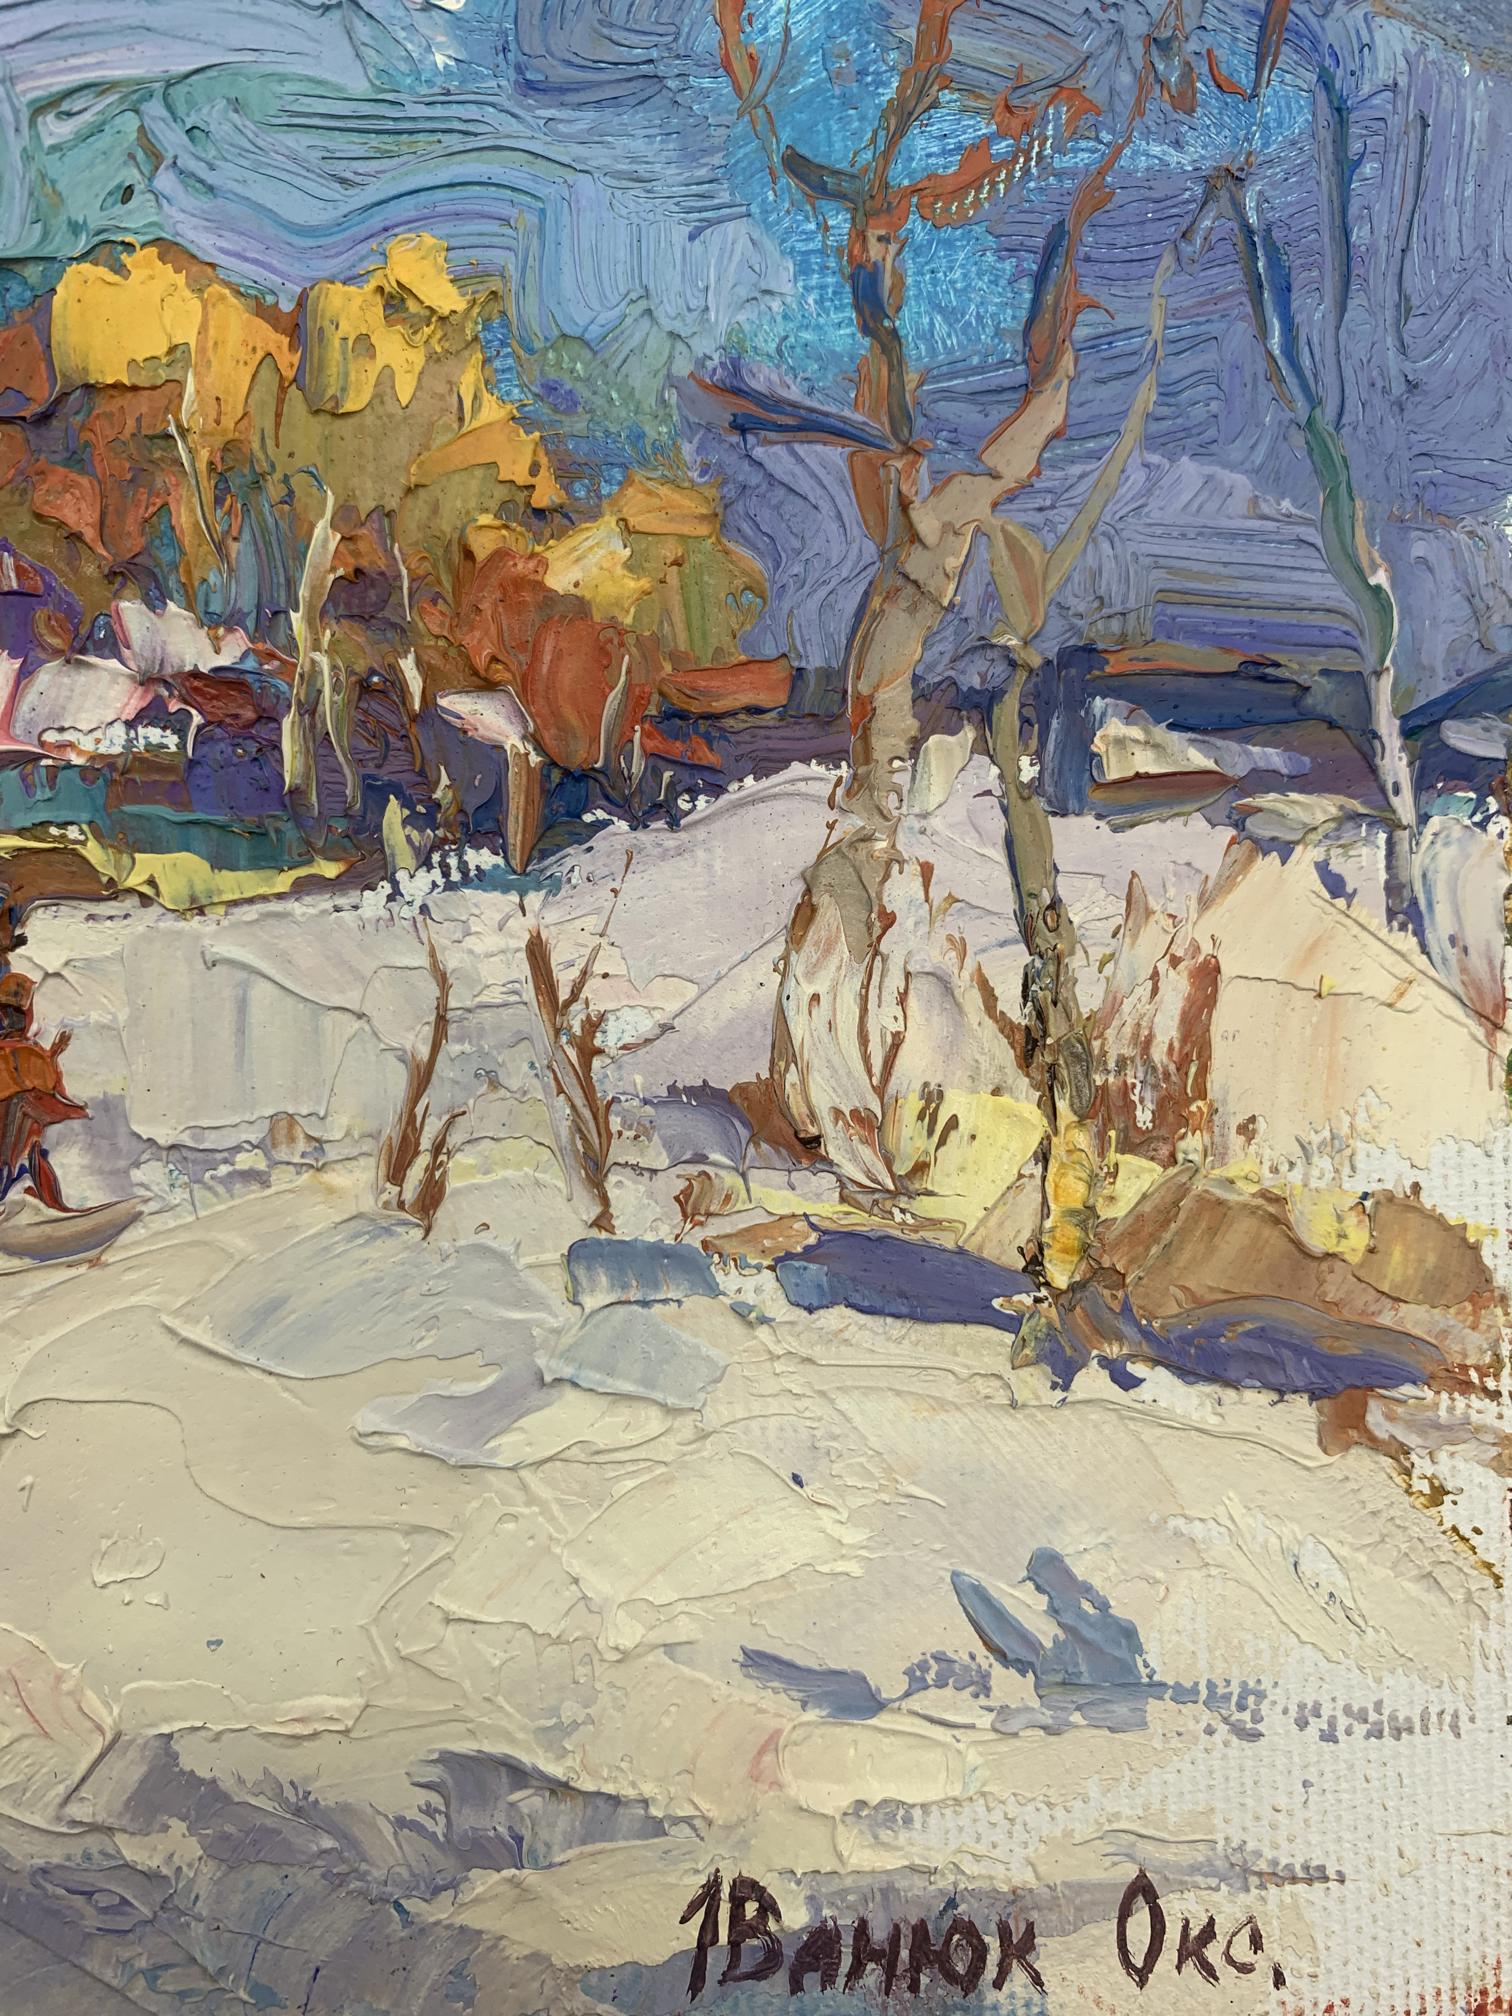 The gentle warmth of the winter sun captured by Oksana Ivanyuk in her oil painting